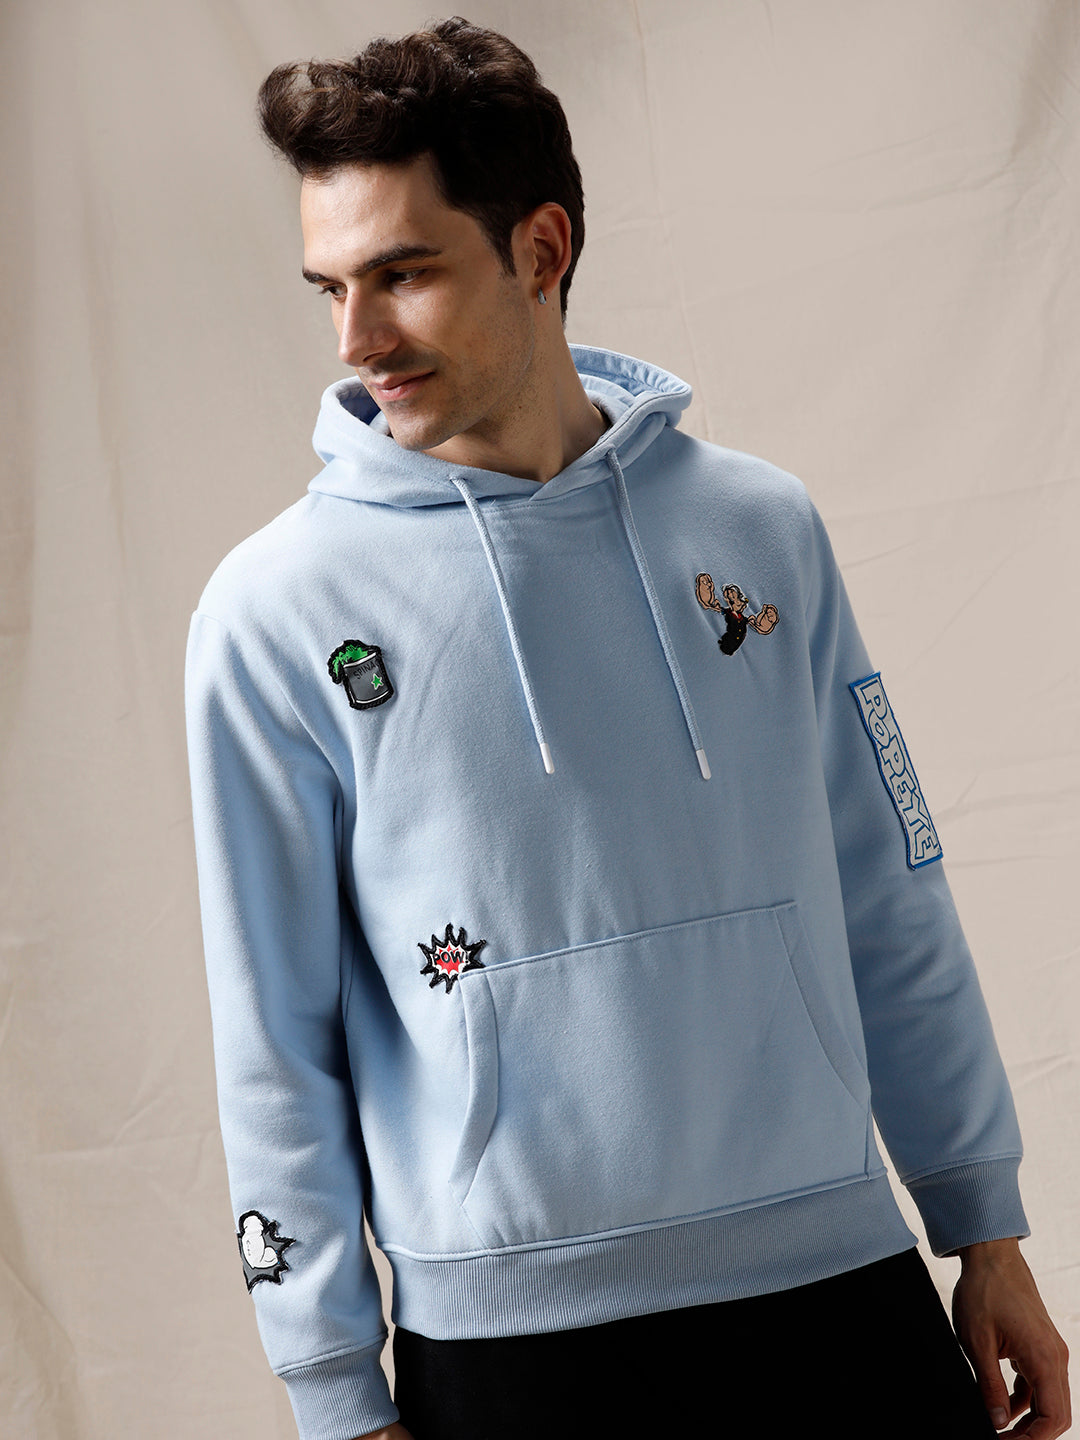 Quirky Popeye Comfort Hoodie